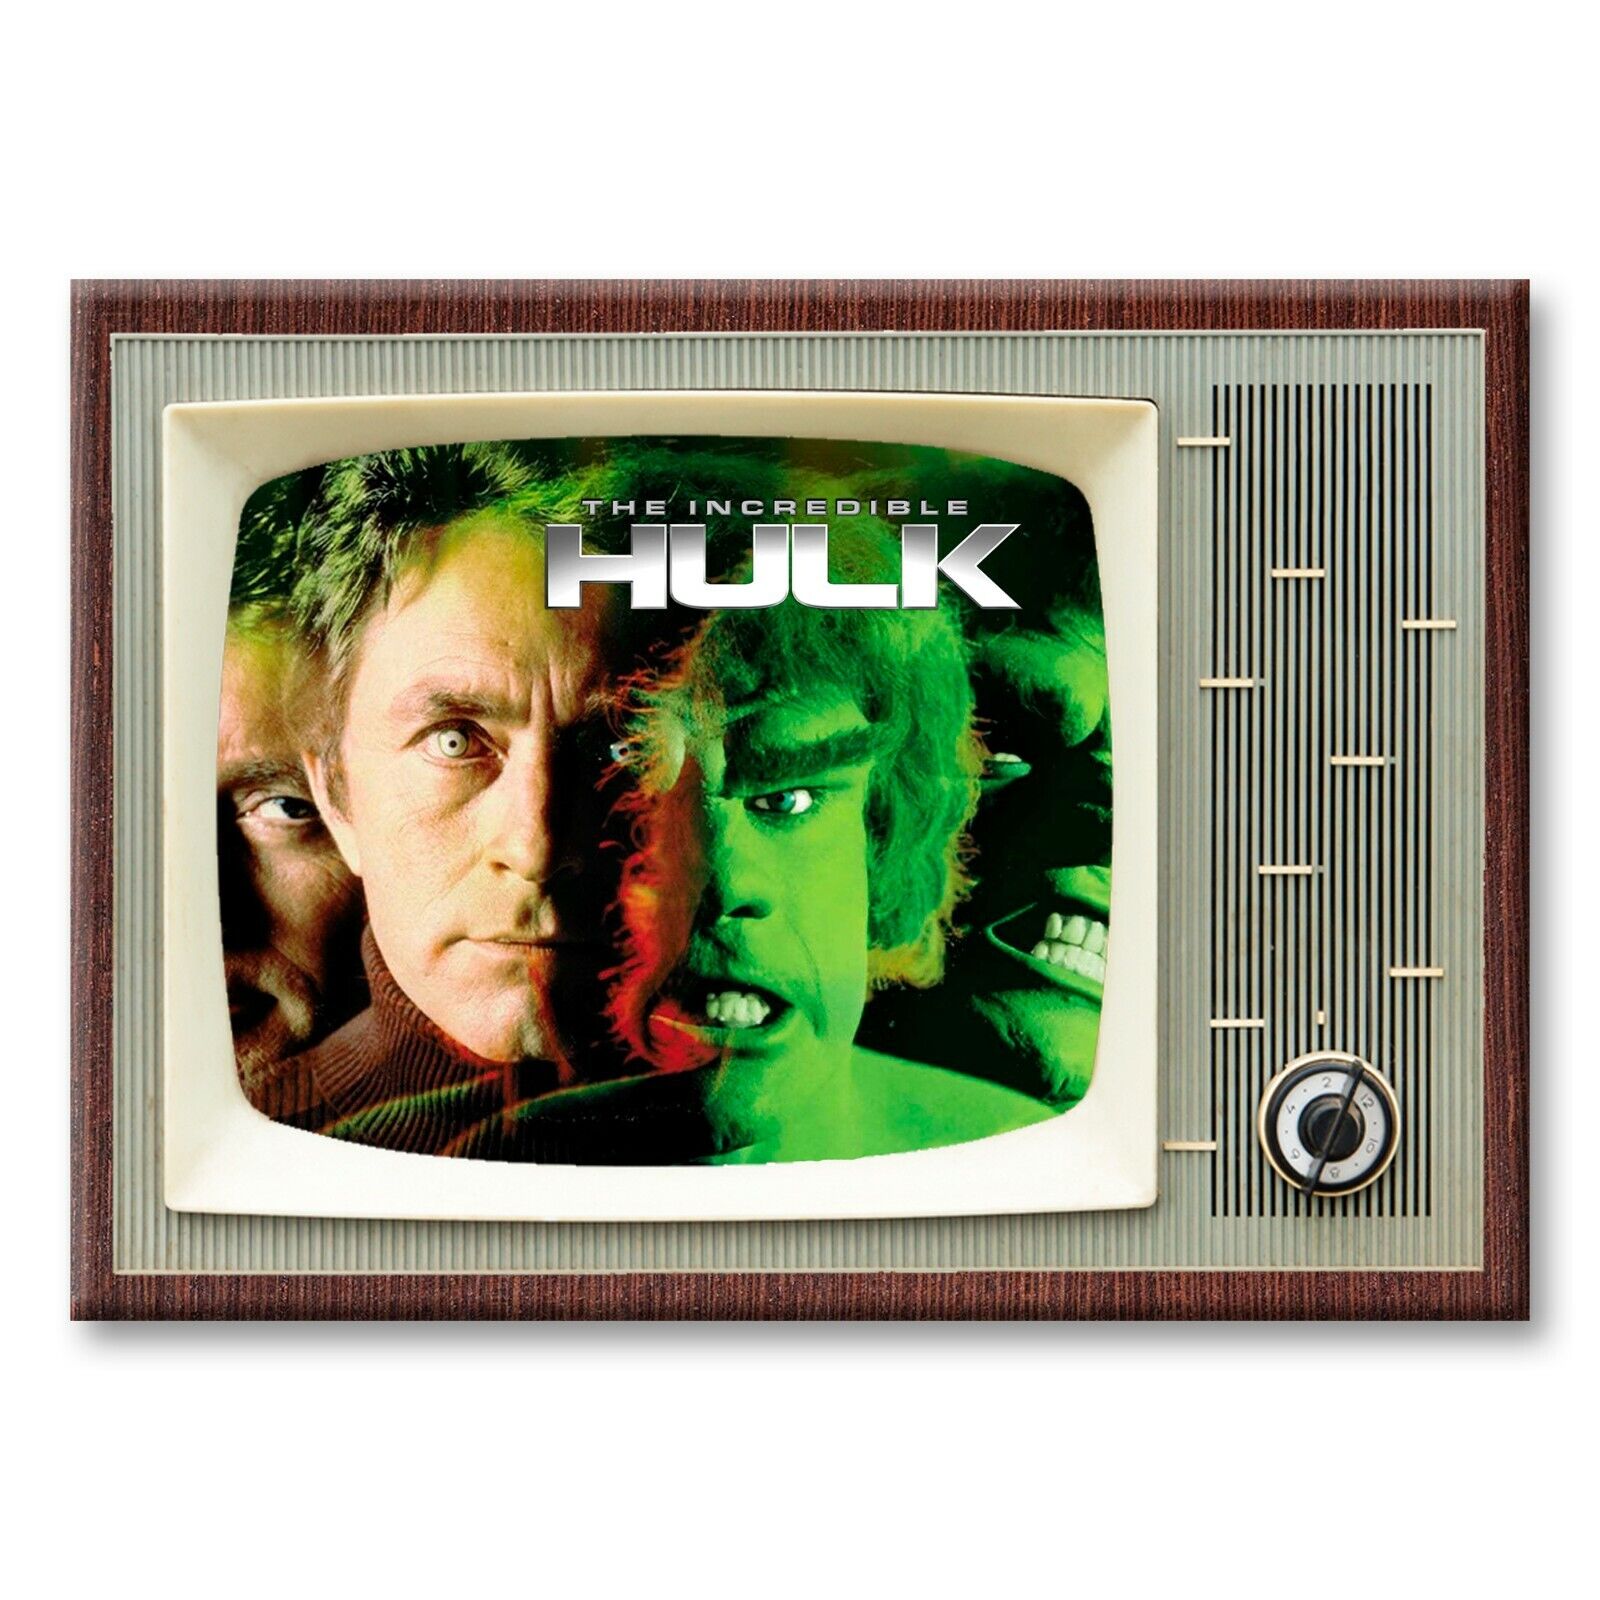 THE INCREDIBLE HULK TV Show Classic TV 3.5 inches x 2.5 inches FRIDGE MAGNET 